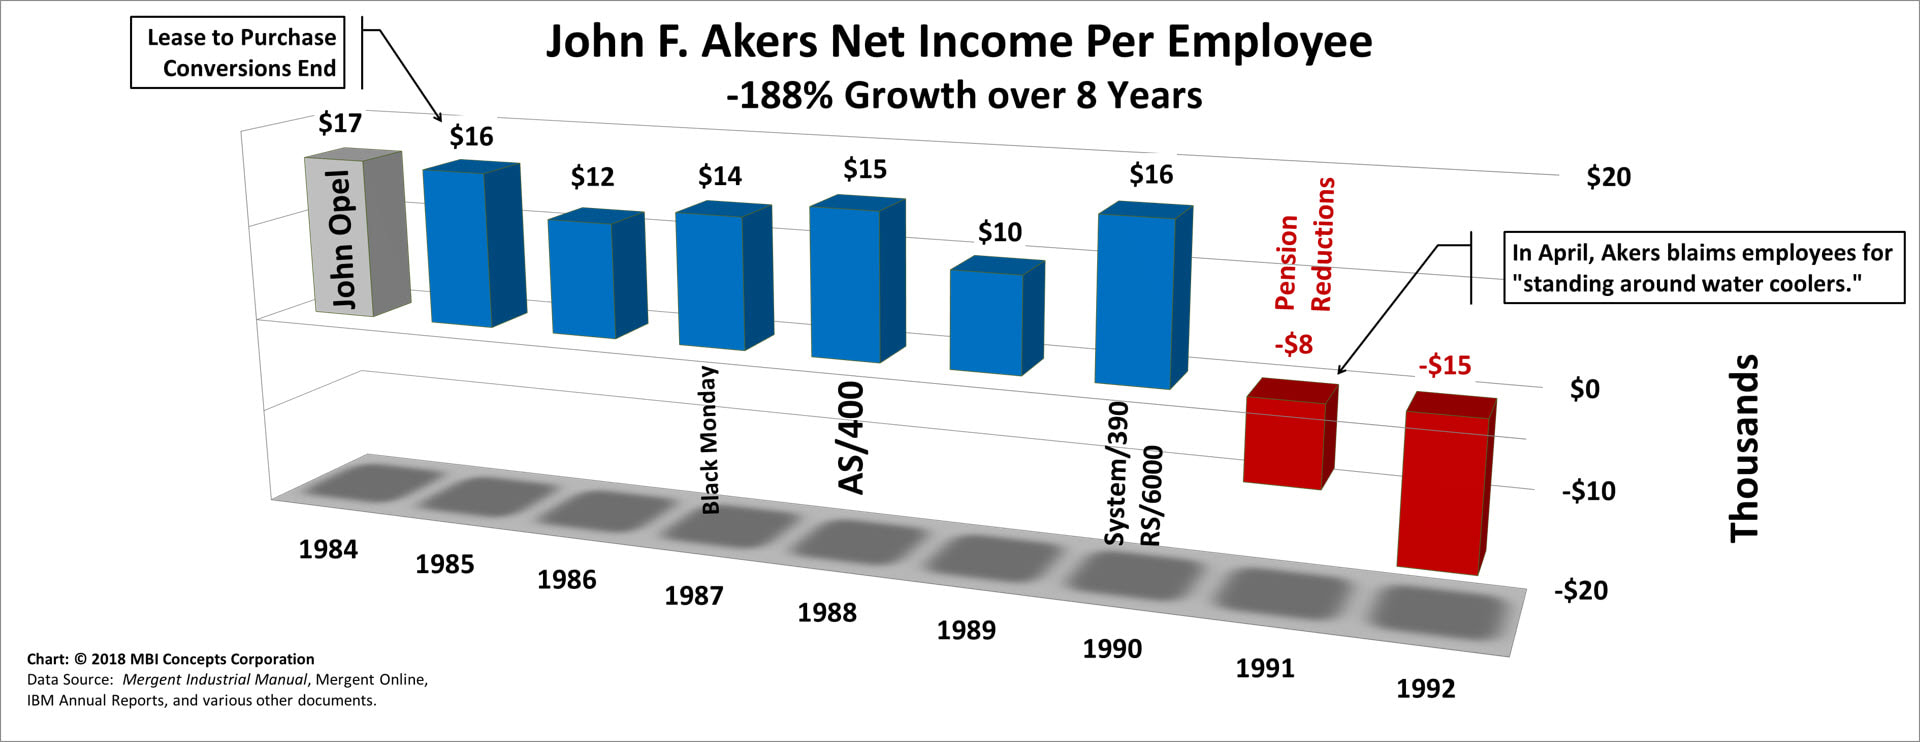 A color bar chart showing IBM's yearly net income (profit) per employee from 1984 to 1992 for IBM Chief Executive Officer John F. Akers.